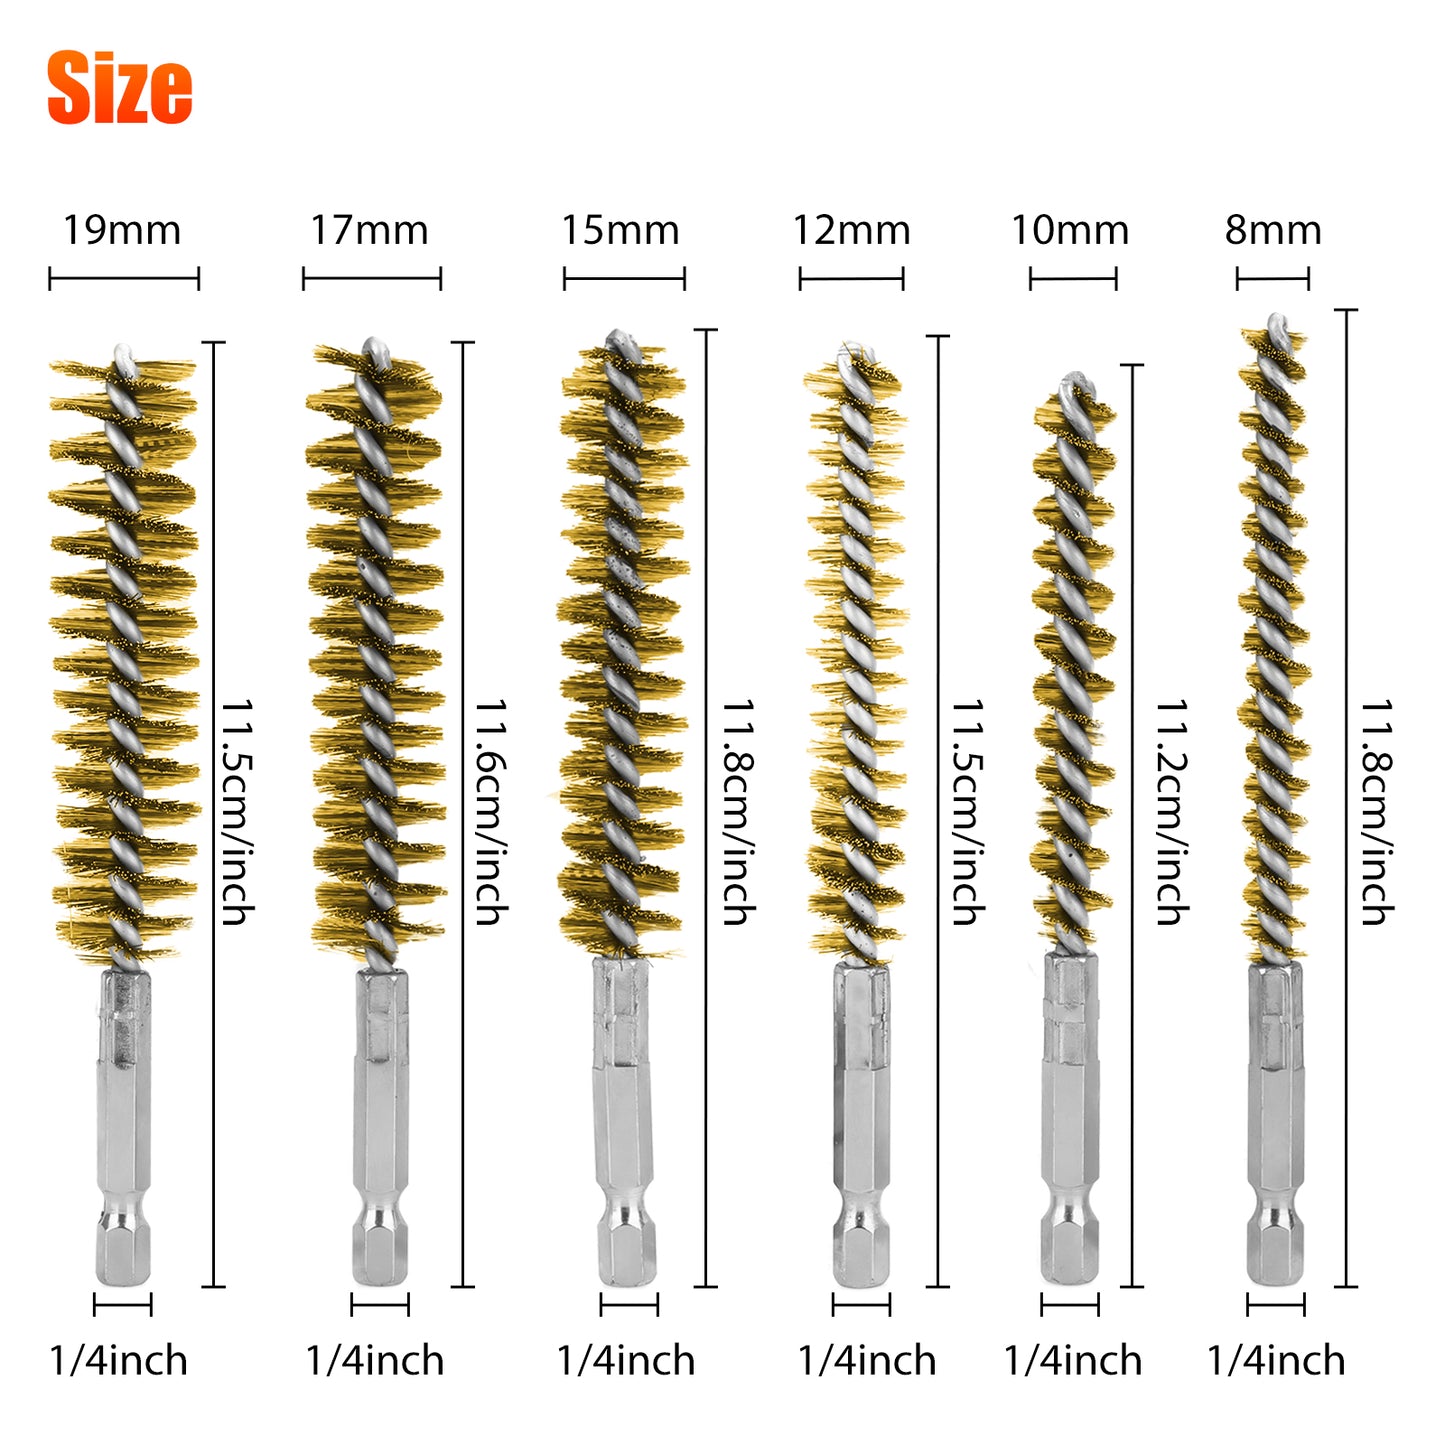 High-Quality Brass Bore Cleaning Brushes - Set of 6 Wire Brushes for Cleaning, Polishing, and Rust Removal